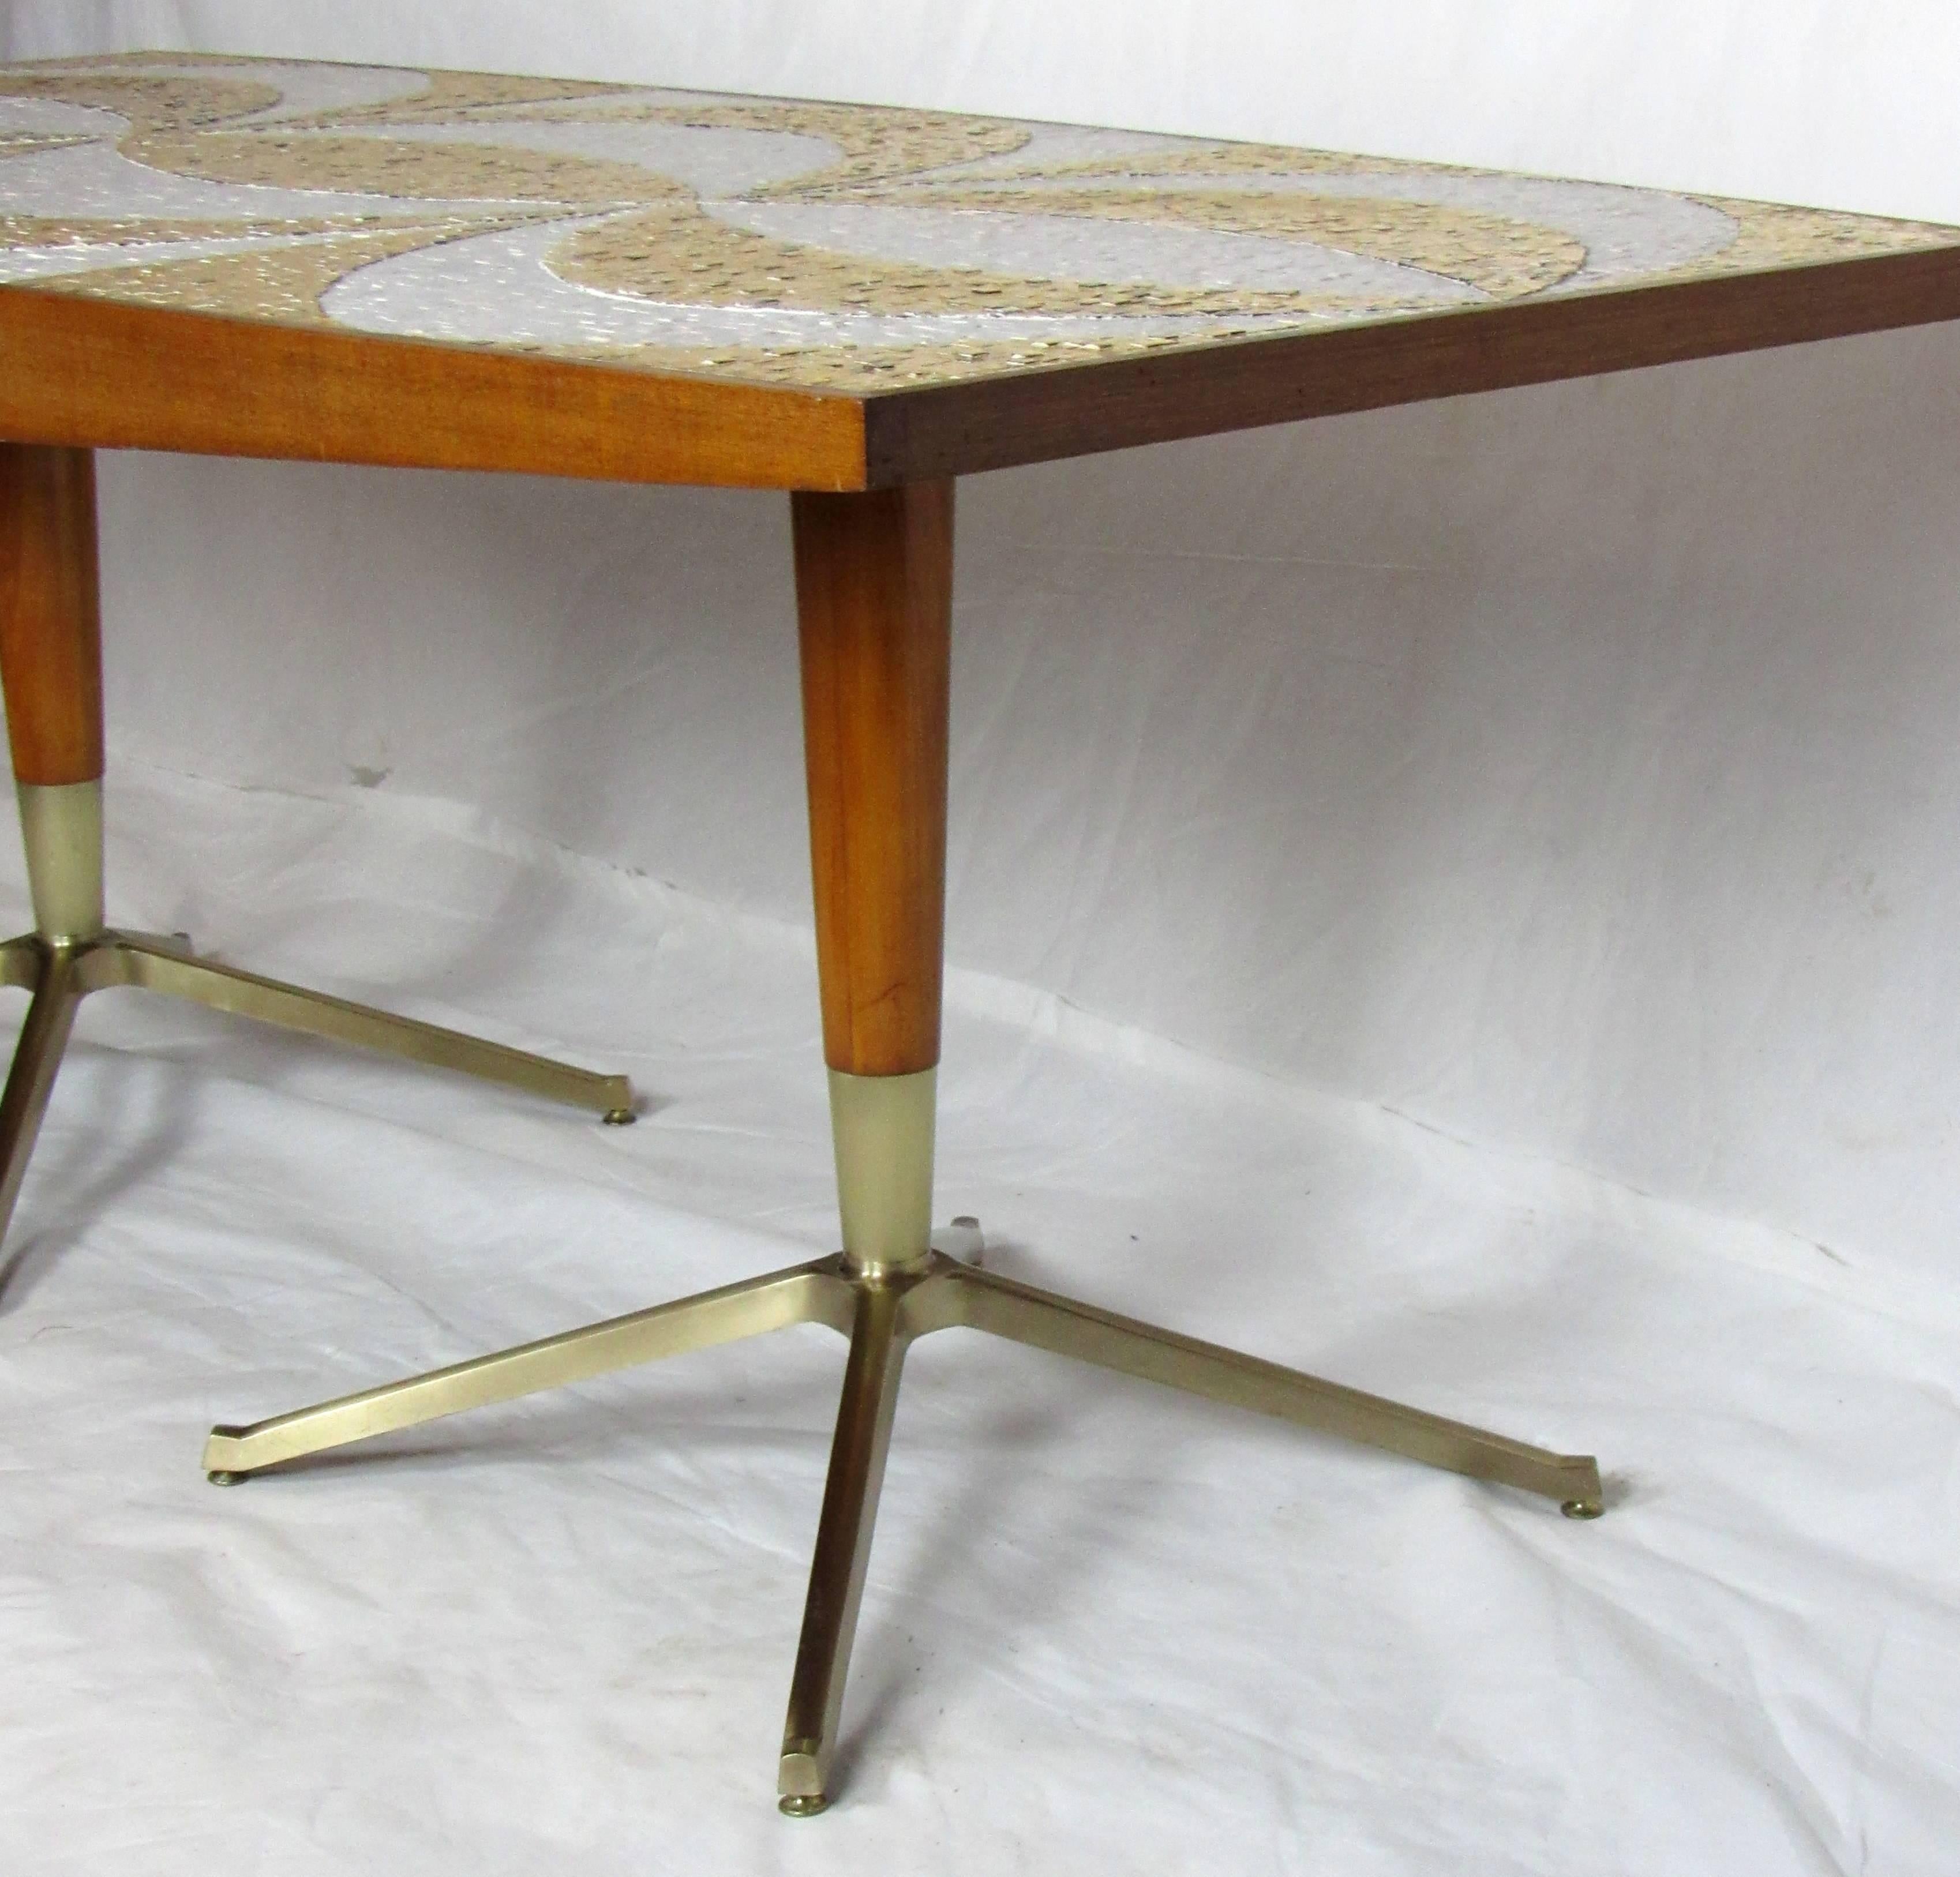 20th Century Mosaic Dining Table Writing Desk with Mahogany and Bronze Bases, circa 1958